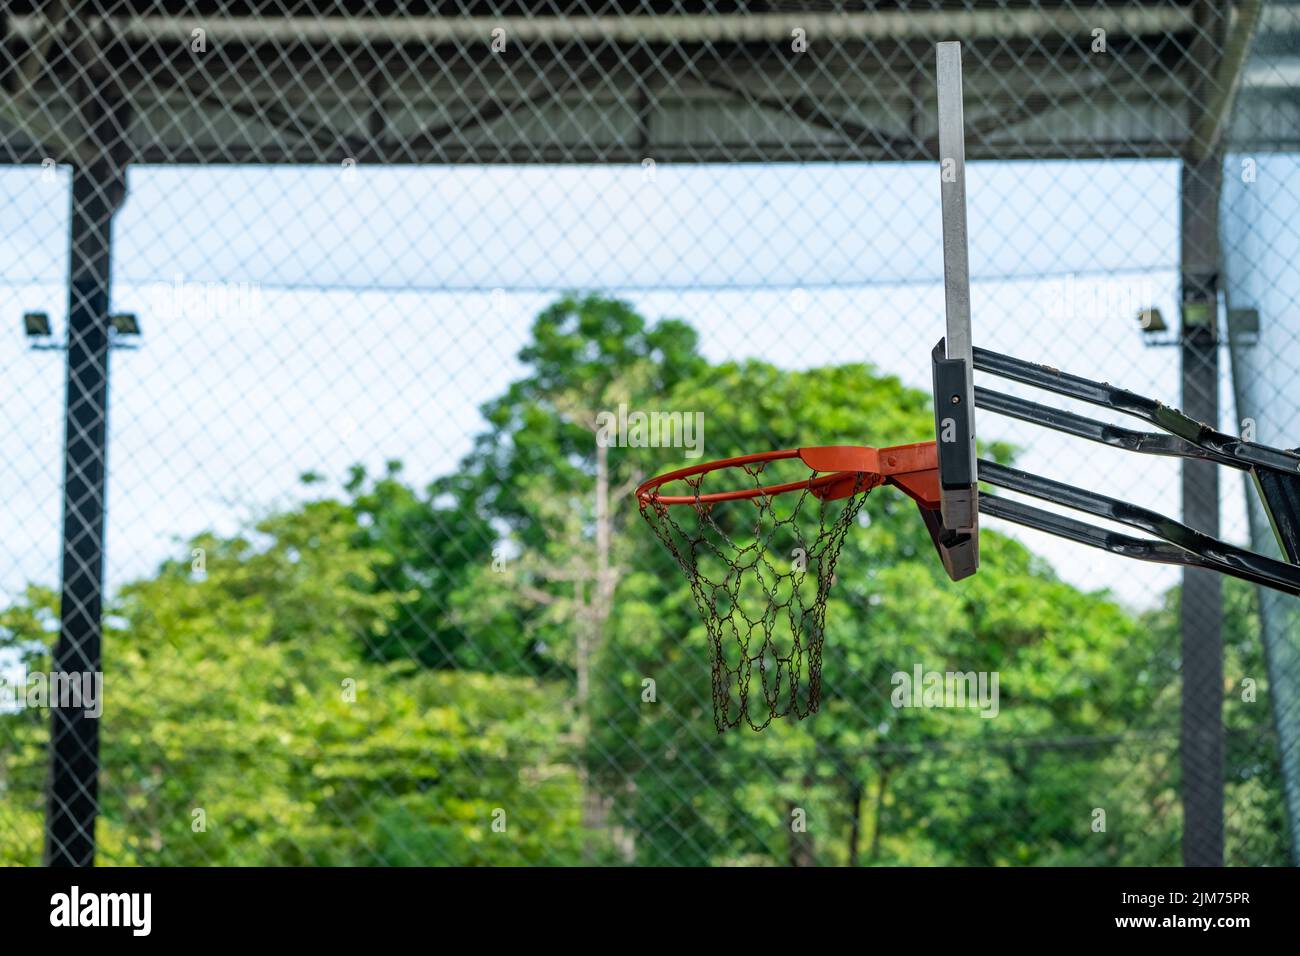 basketball backboard is translucent that the green trees in the background can be seen. Stock Photo